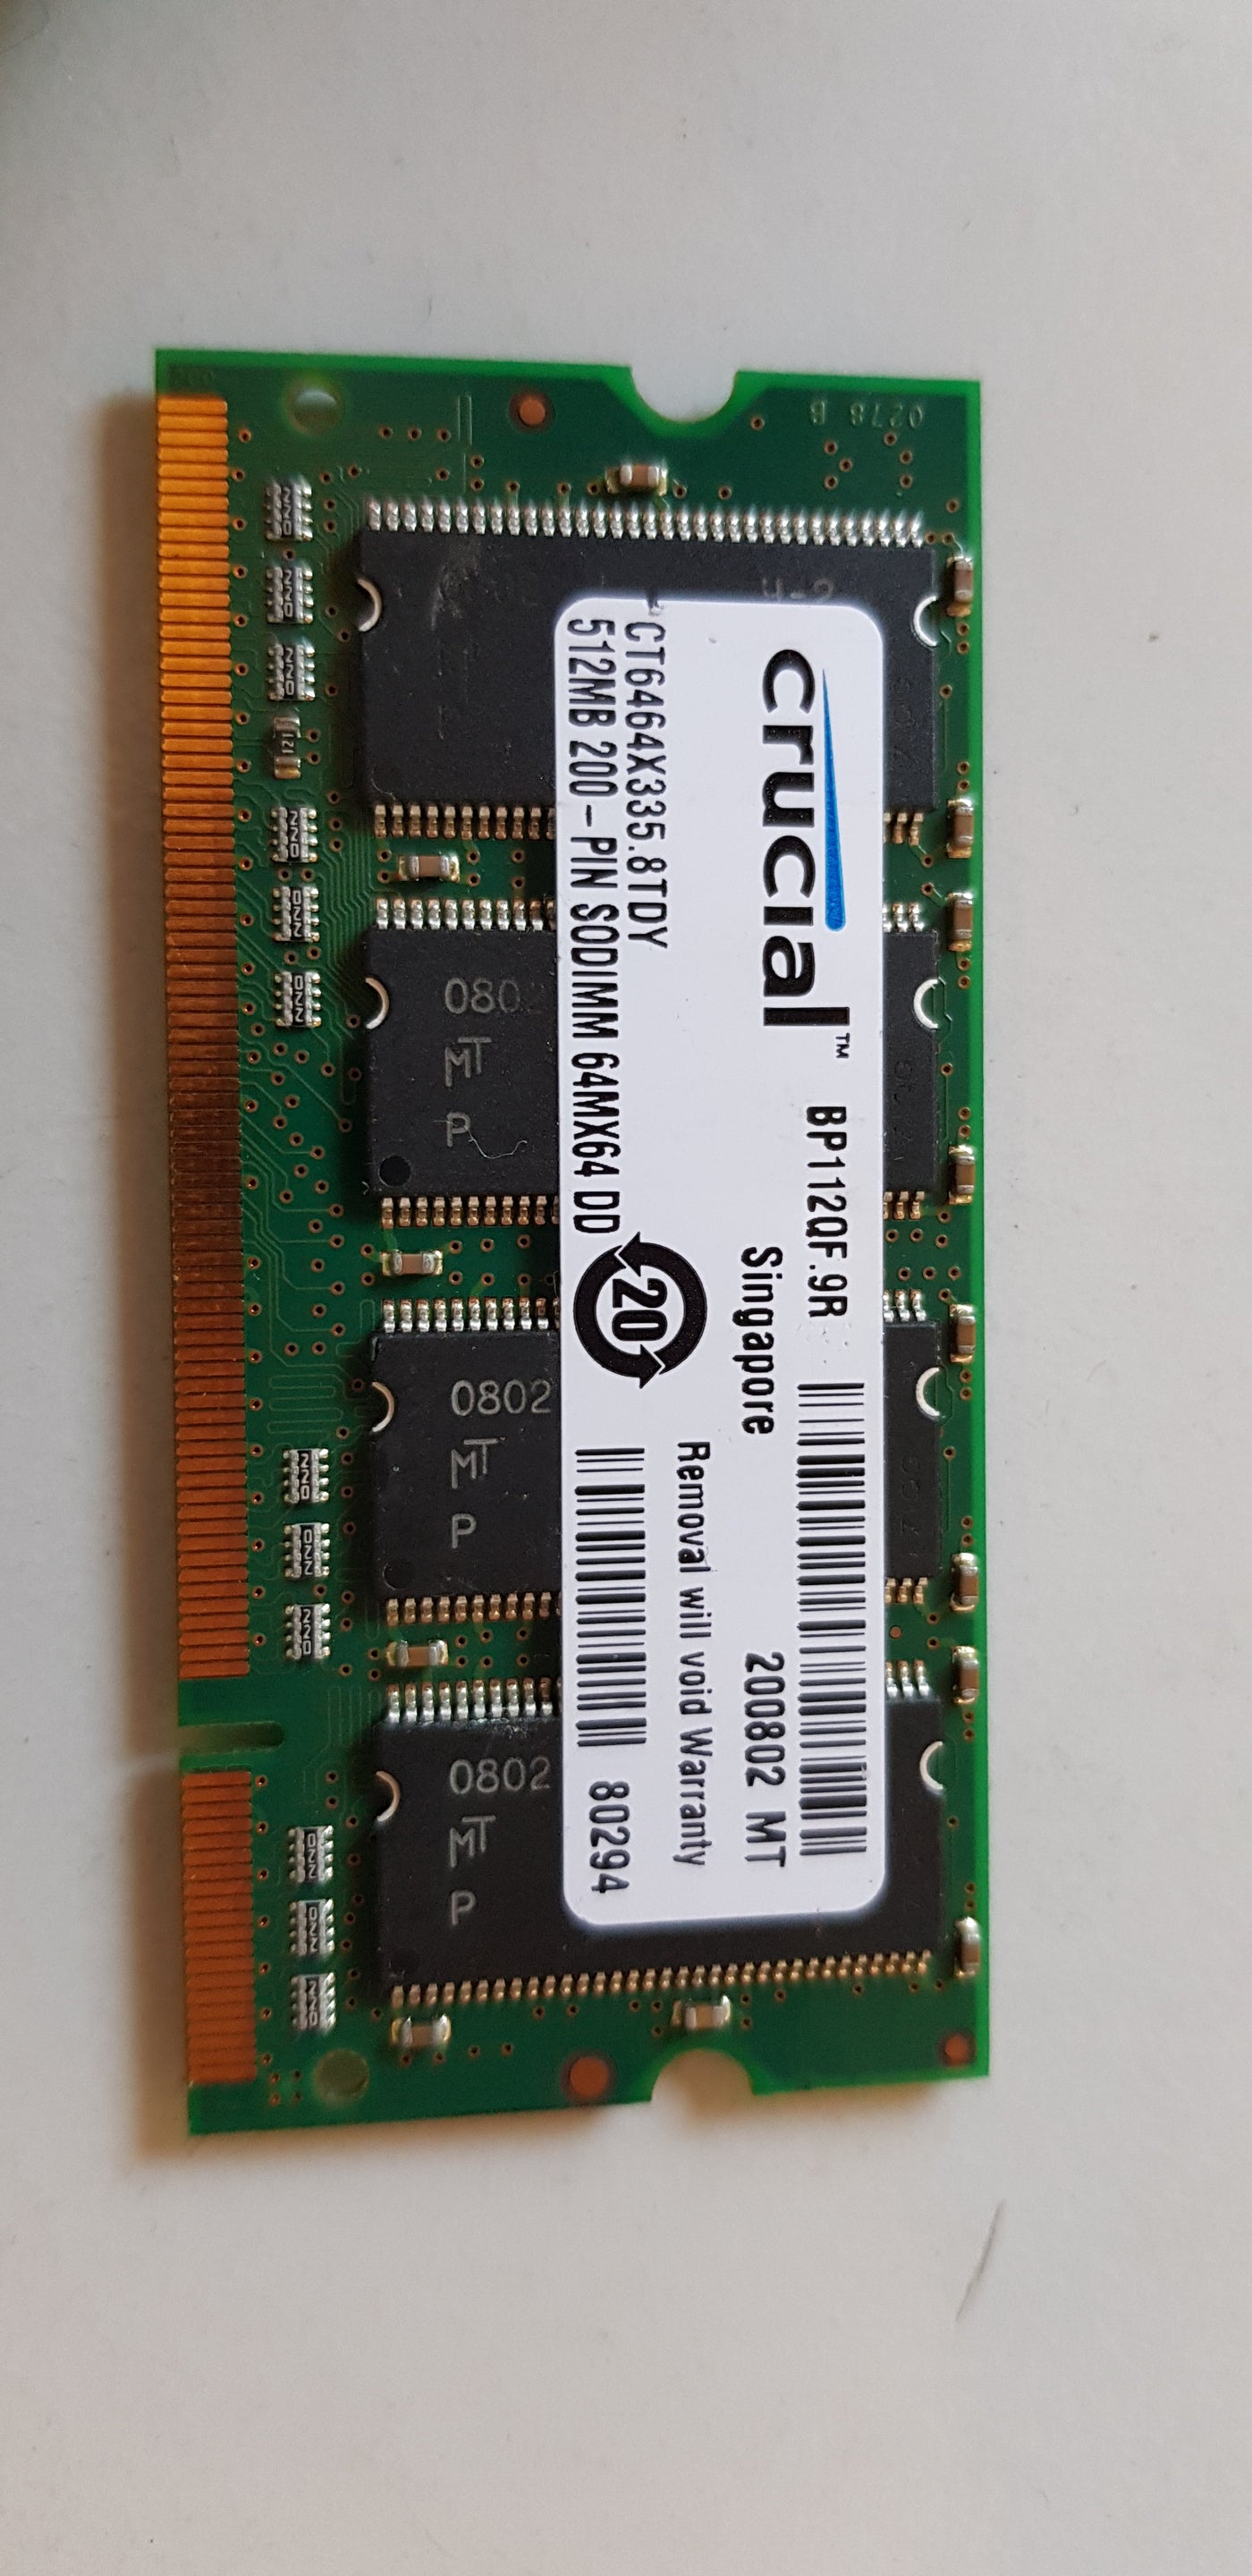 Micron / Crucial 512MB PC2700S nonECC CL2.5 DDR SODIMM Memory Module (MT8VDDT6464HY-335D1 / CT6464X335.8TDY)